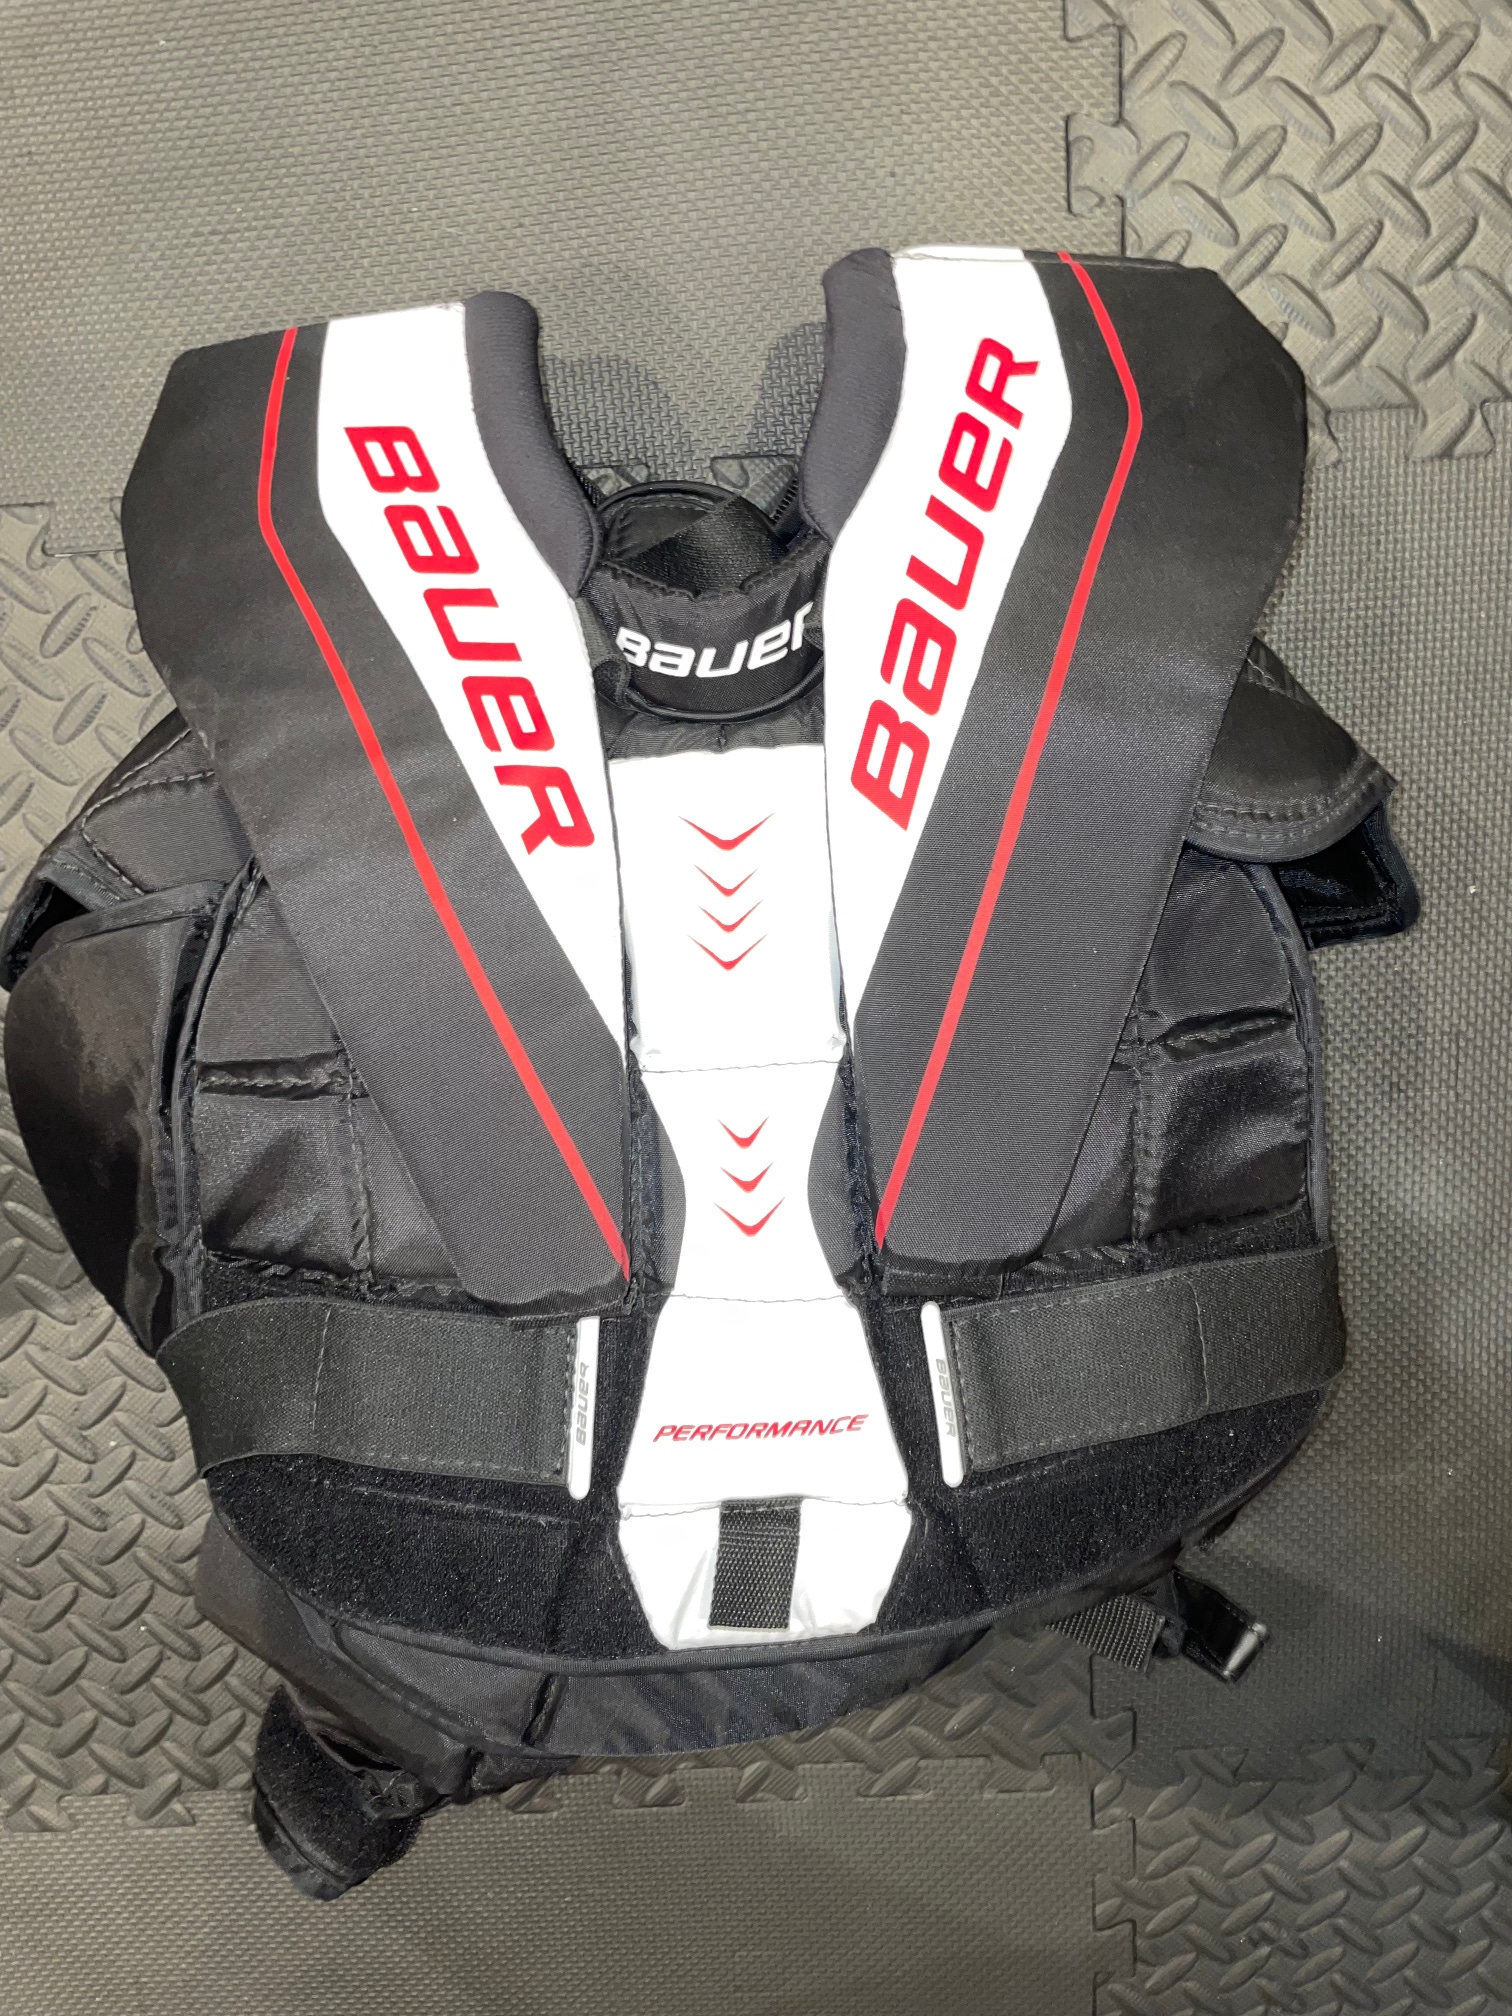 New Junior Large Bauer Performance Goalie Chest Protector